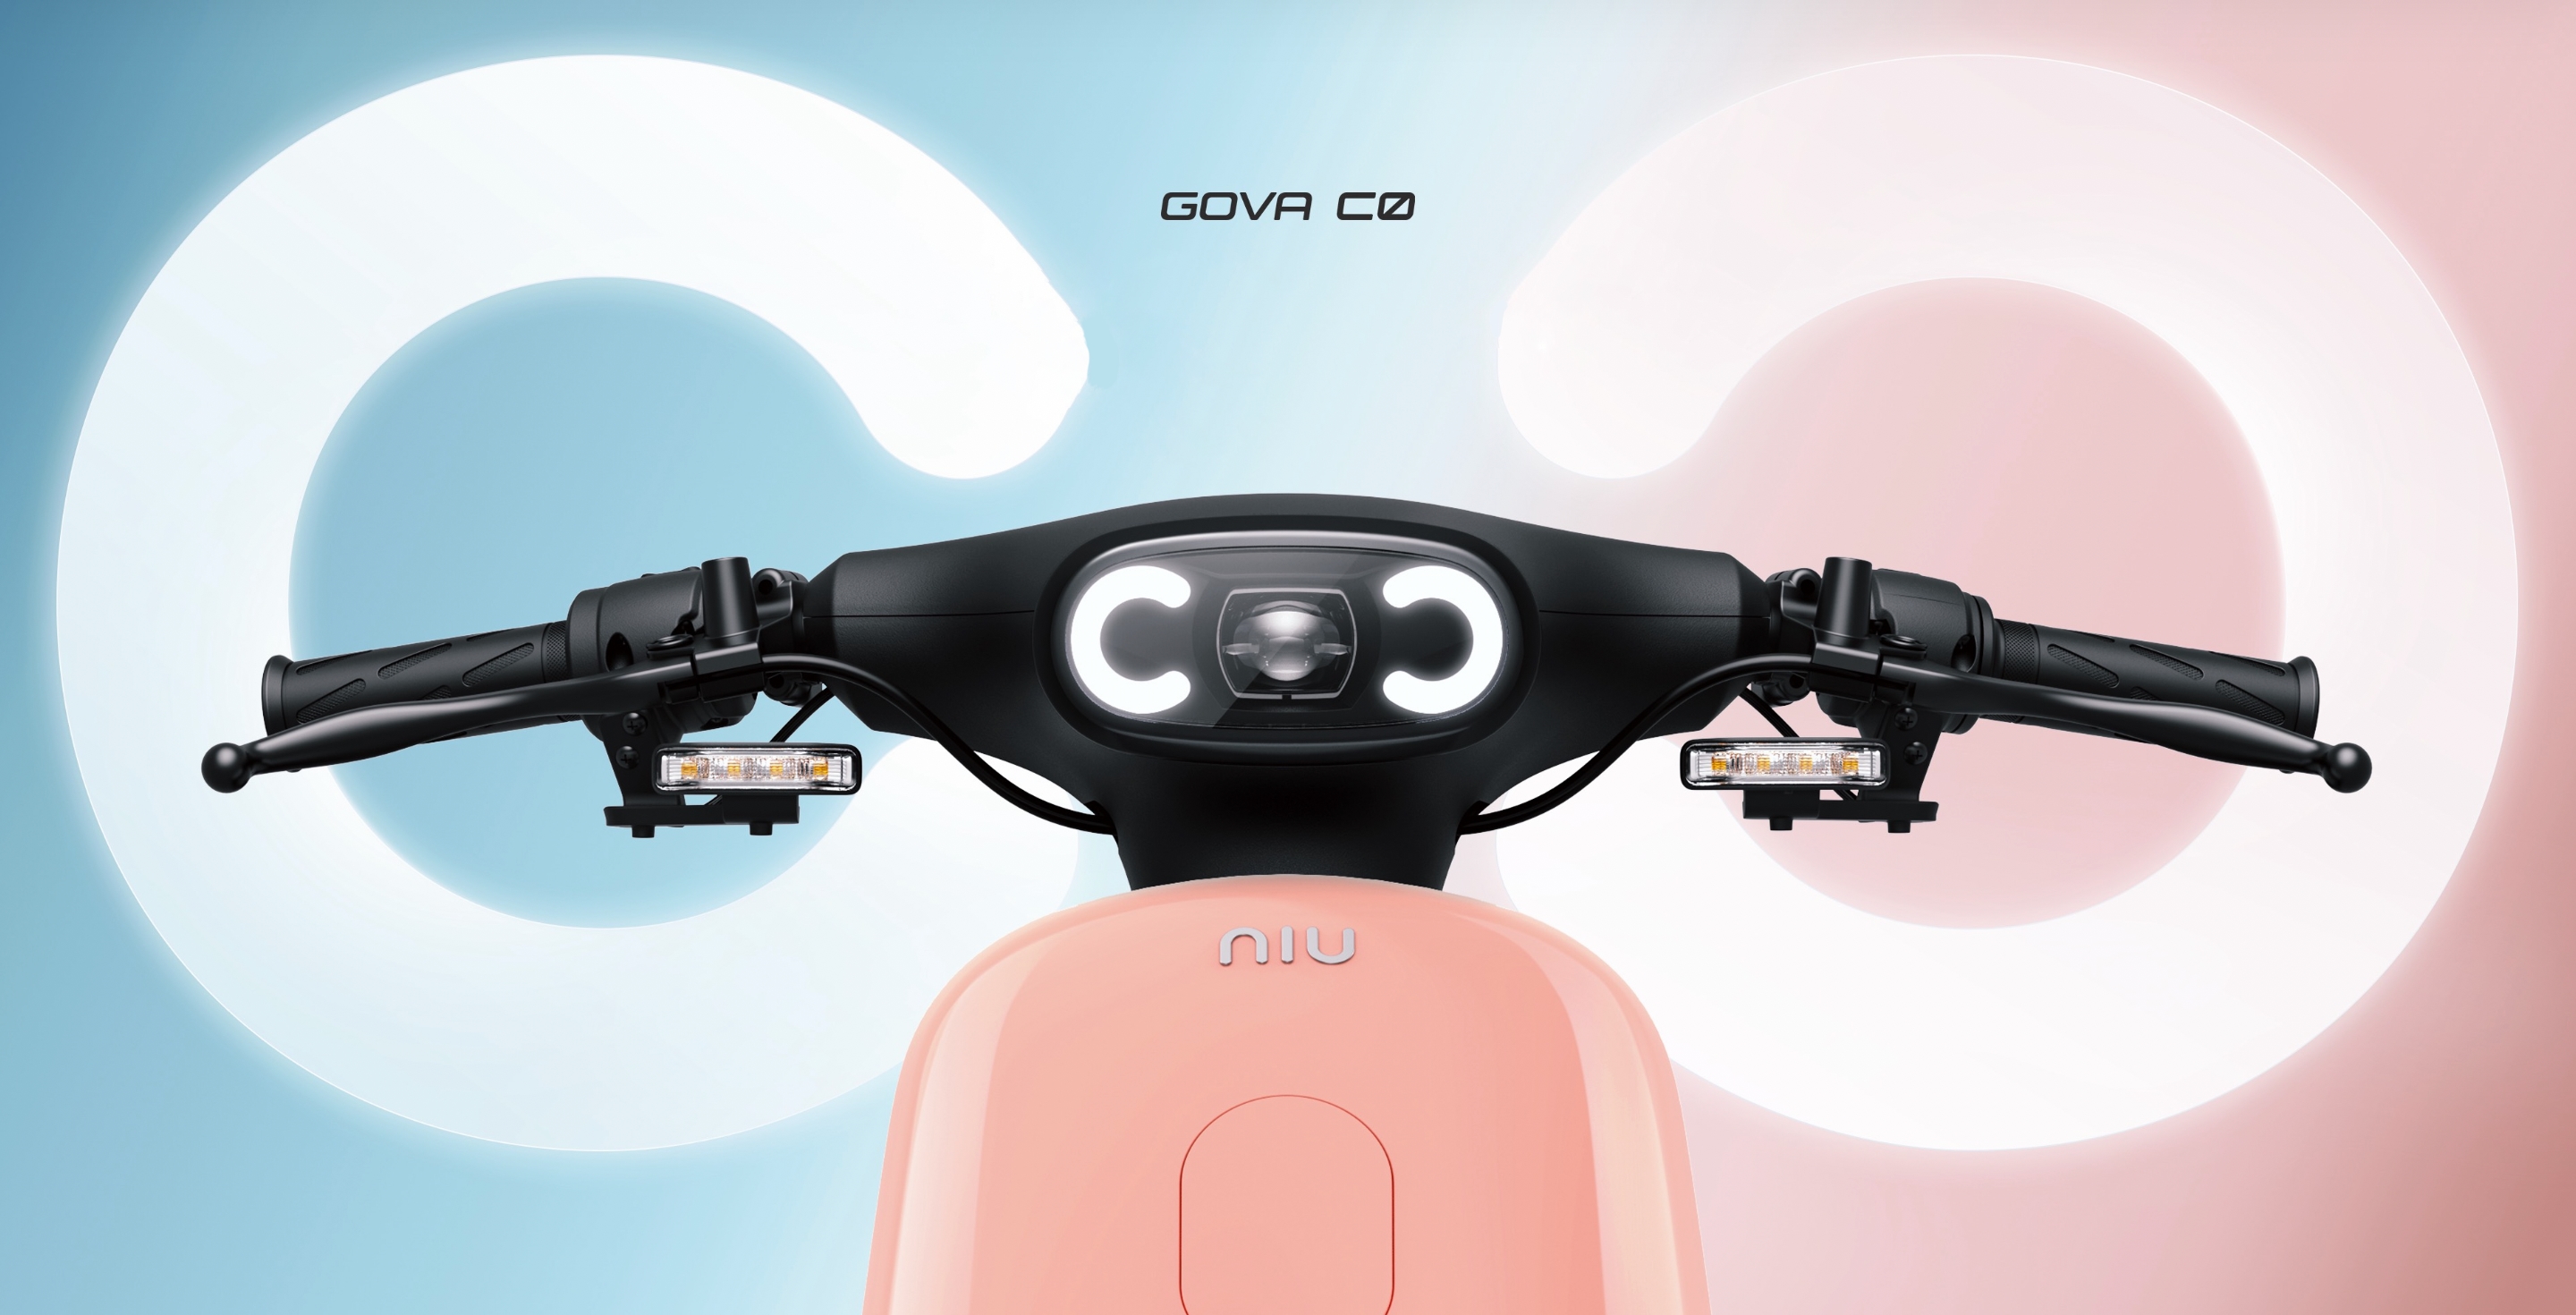 NIU GOVA C0: lightweight electric scooter with range up to 60 km and price tag of $525